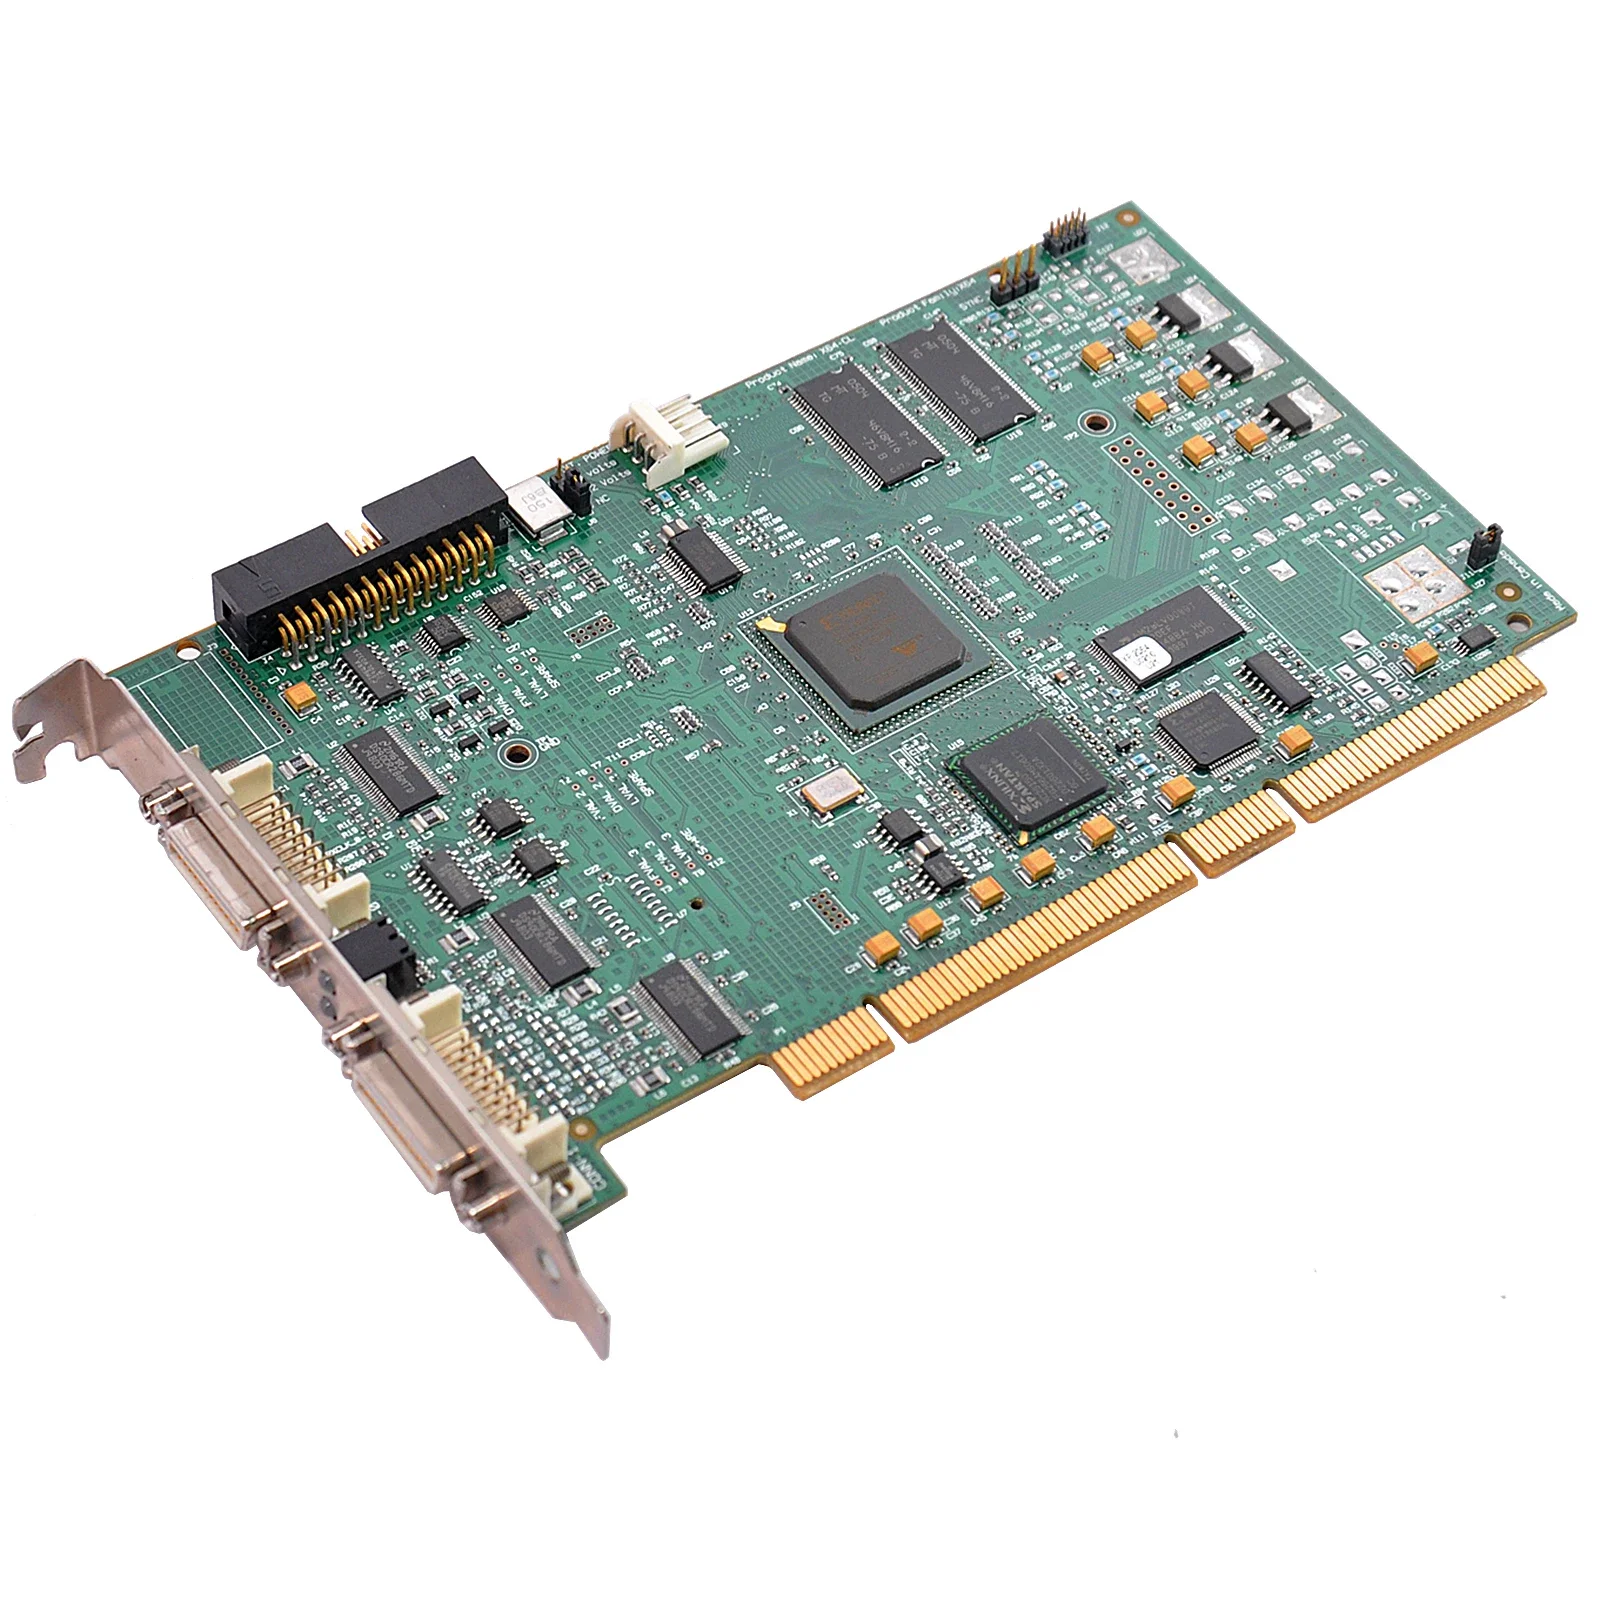 

DALSA X64-CL OC-64C0-00080 Image Capture Card Disassembly Used